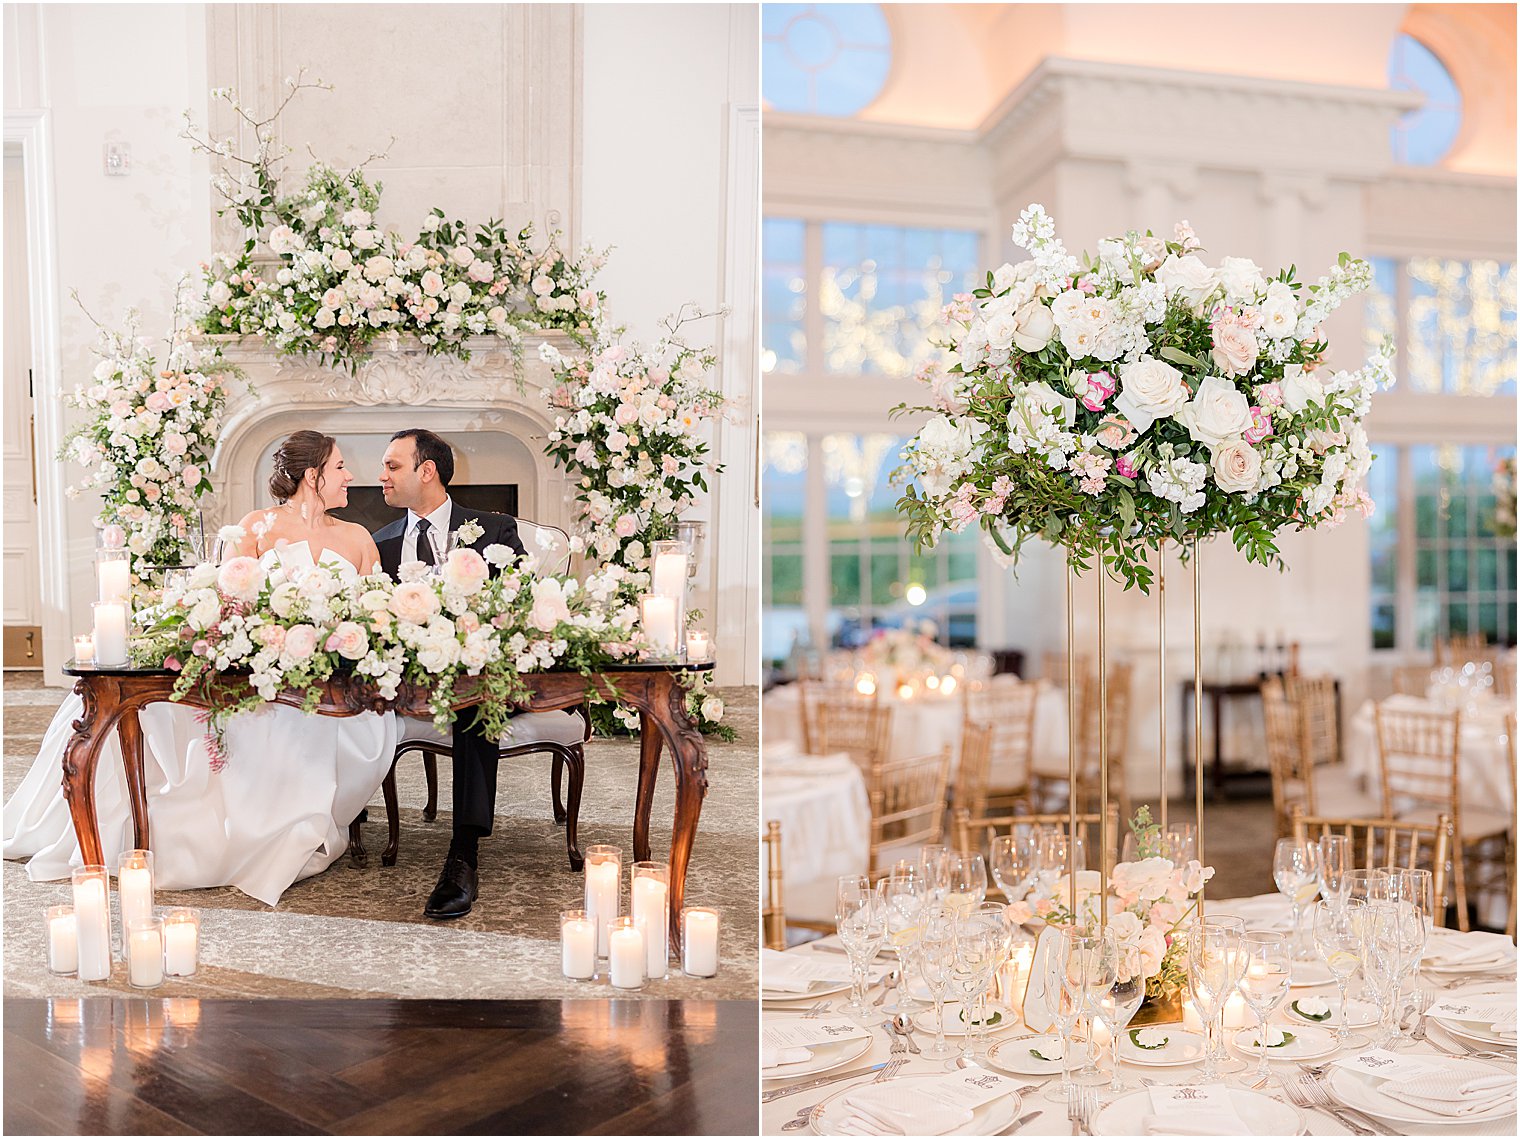 newlyweds sit at sweetheart table during classic spring wedding reception at Park Chateau Estate